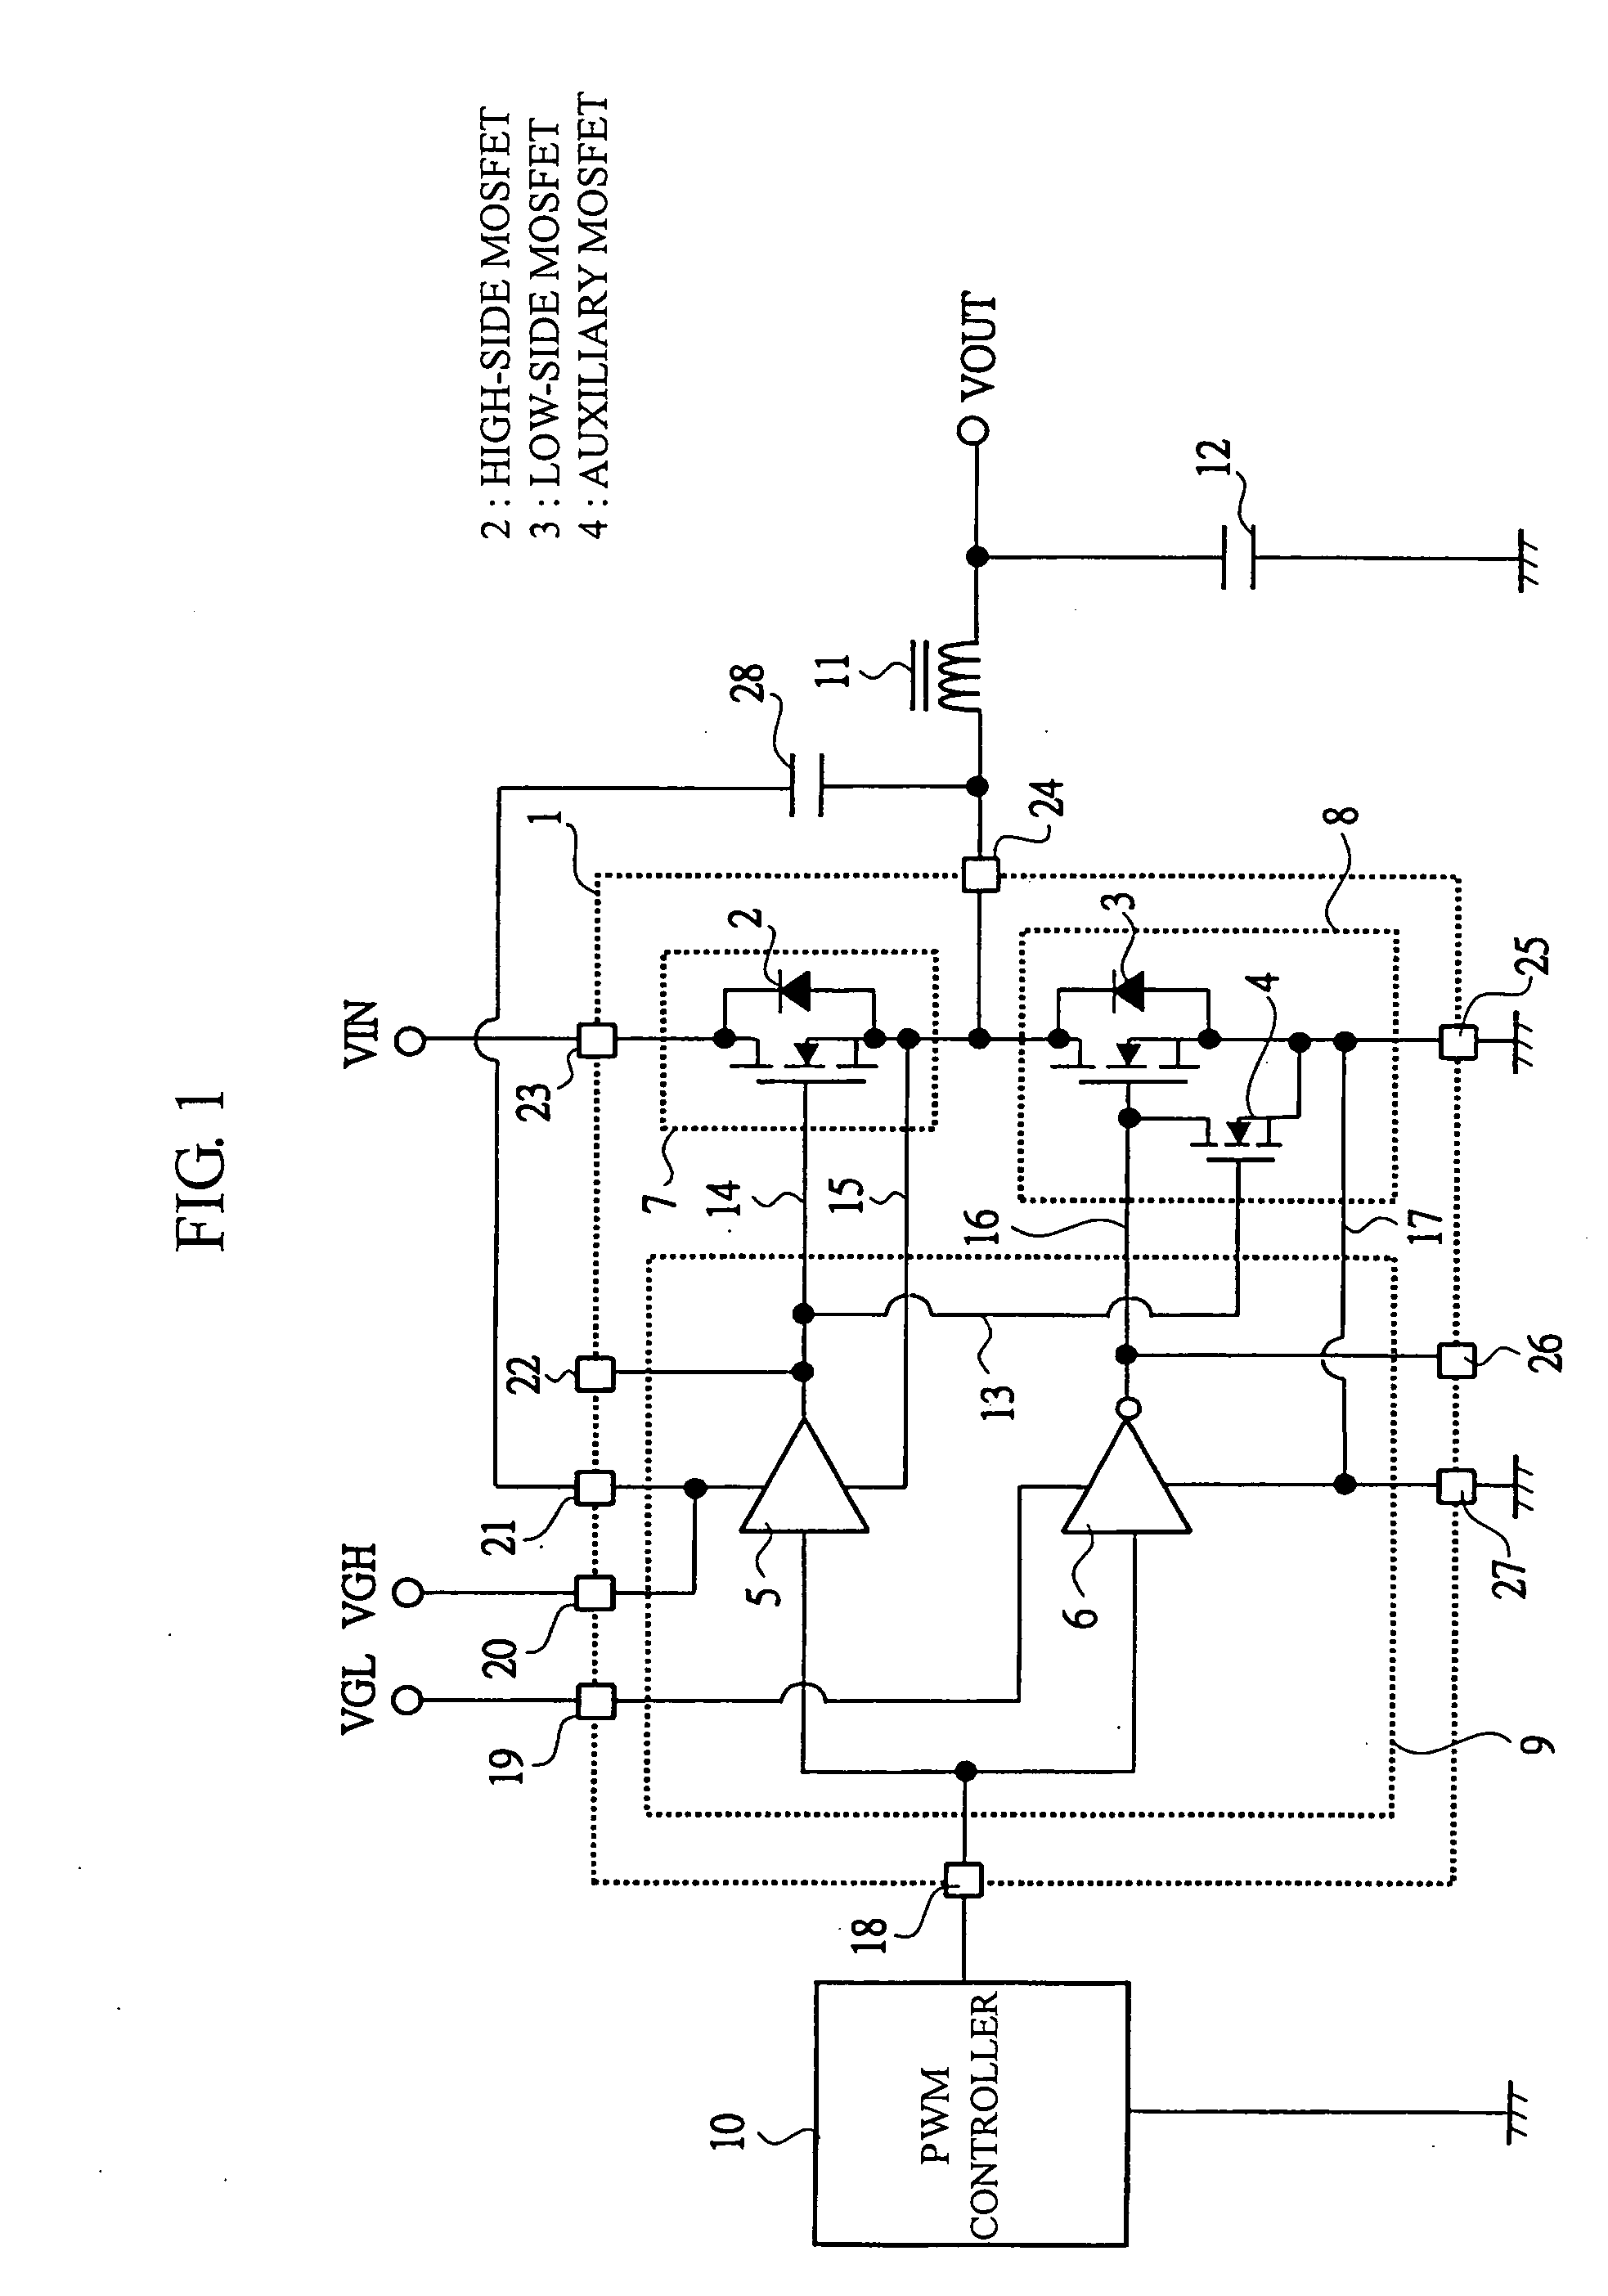 Semiconductor devices, DC/DC converter and power supply